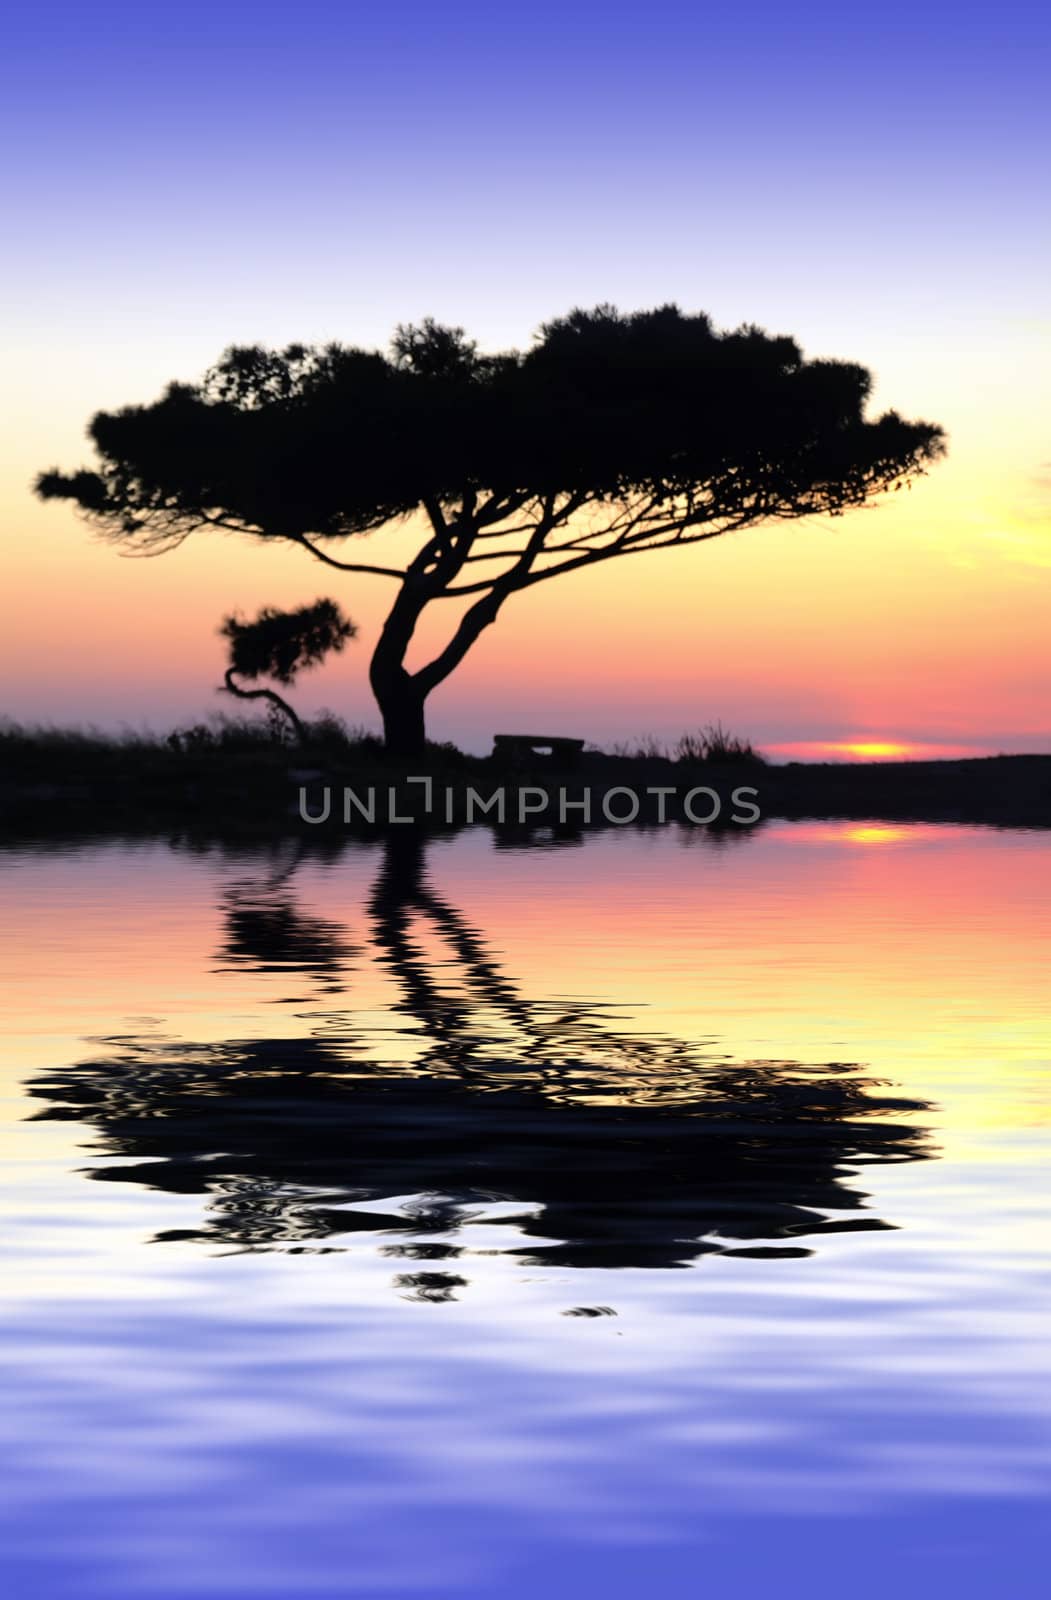 Tranquility at Water's Edge by PhotoWorks